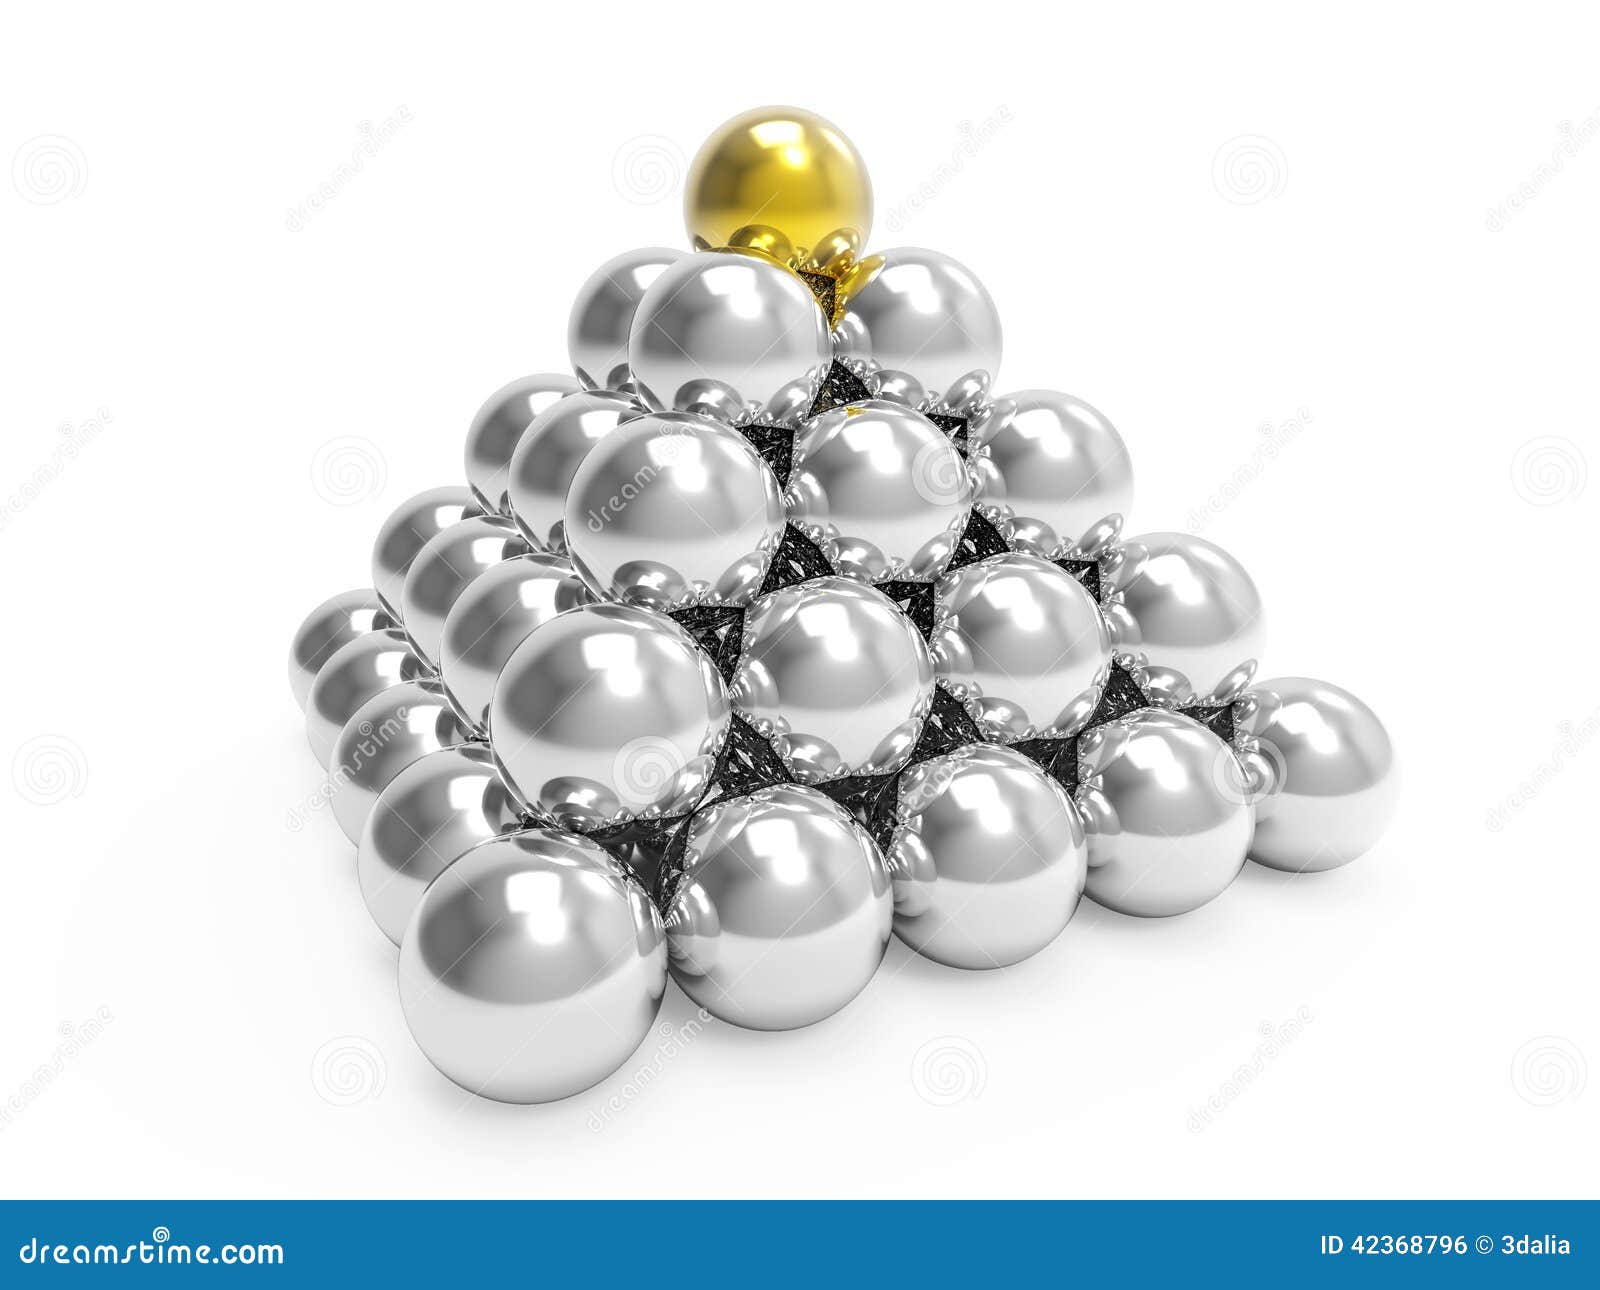 3d Silver pyramid with gold top